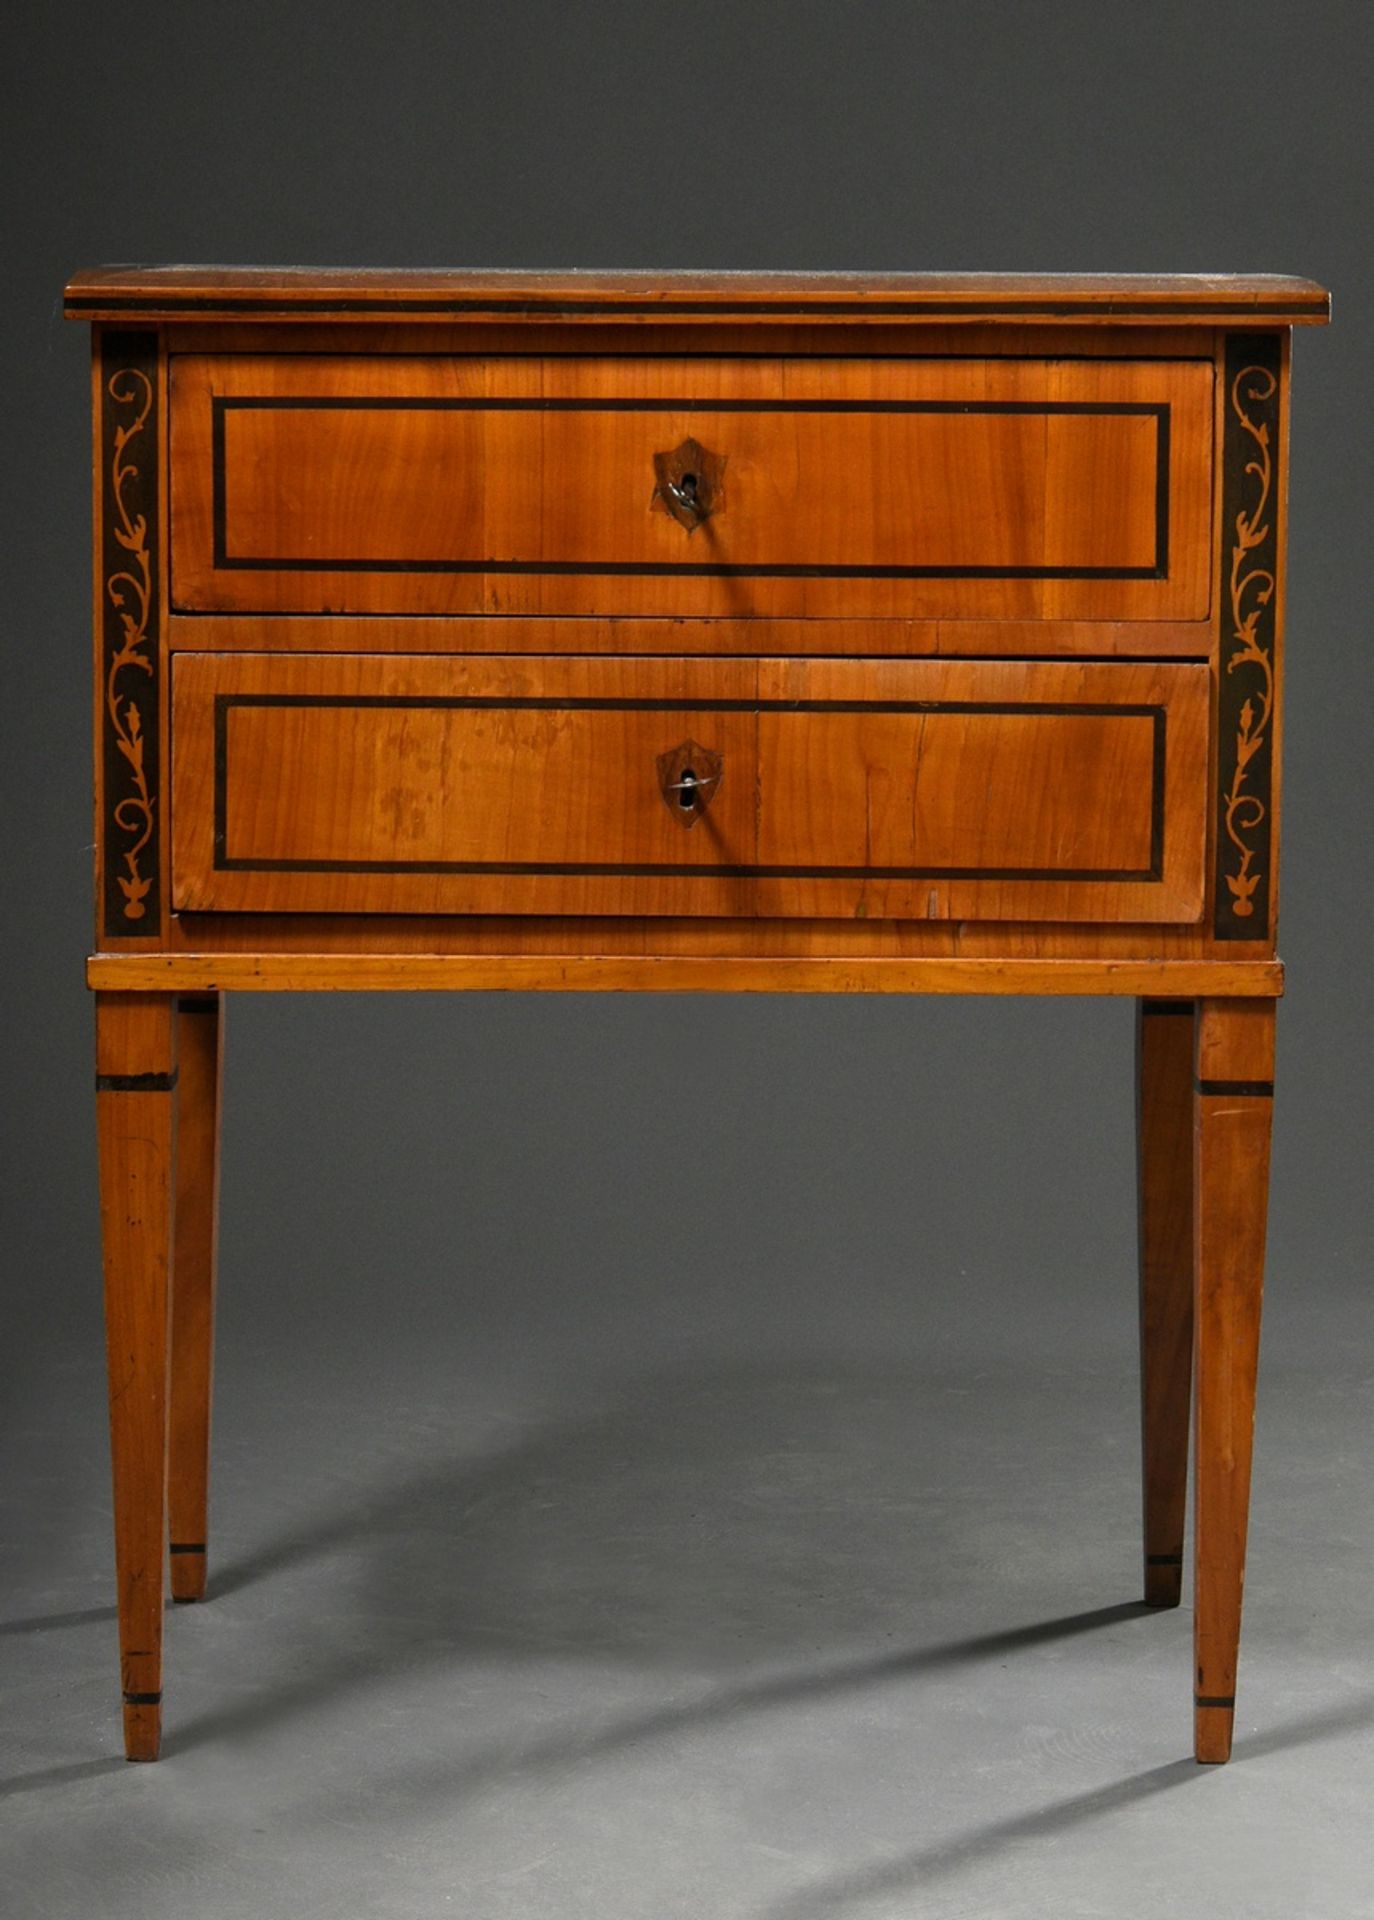 Small console chest on pointed legs with stencilled vines, around 1800/1820, ash partially ebonised - Image 2 of 5